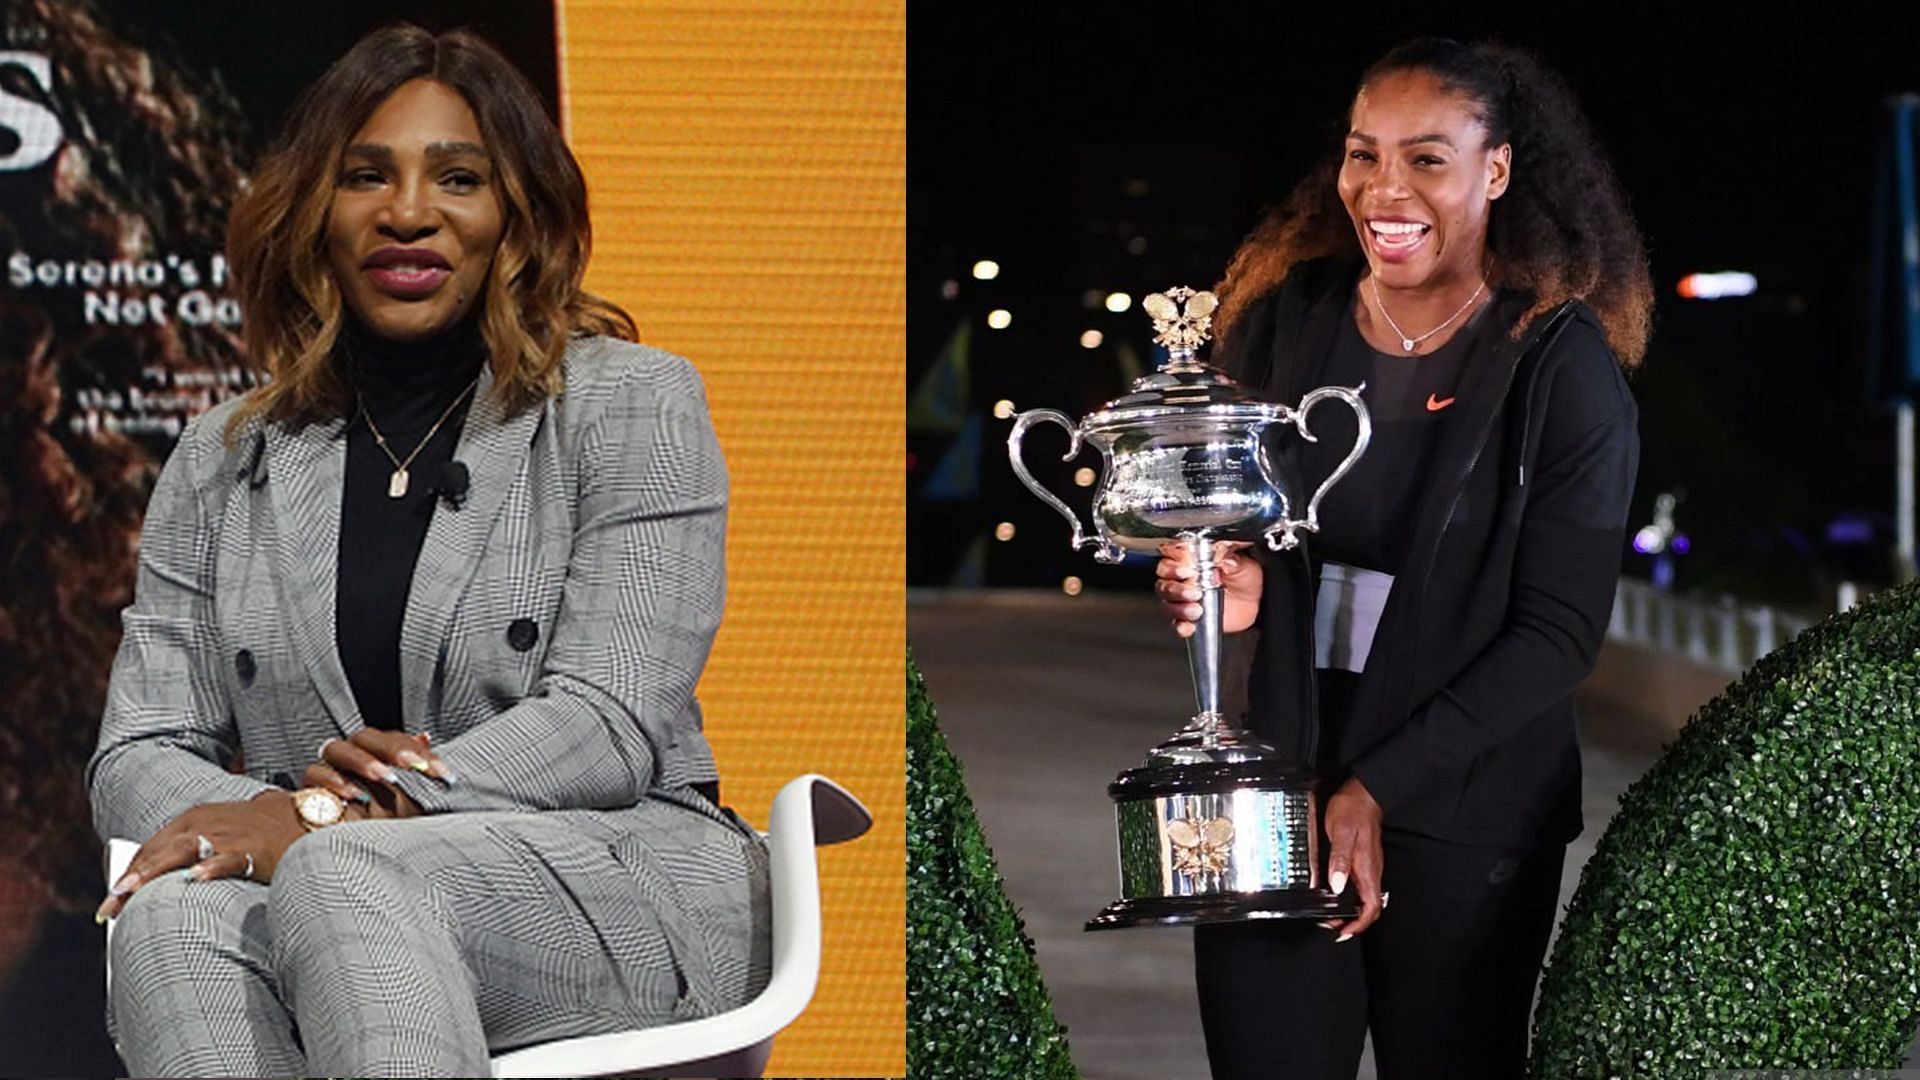 When Serena Williams played and won Australian Open despite being pregnant